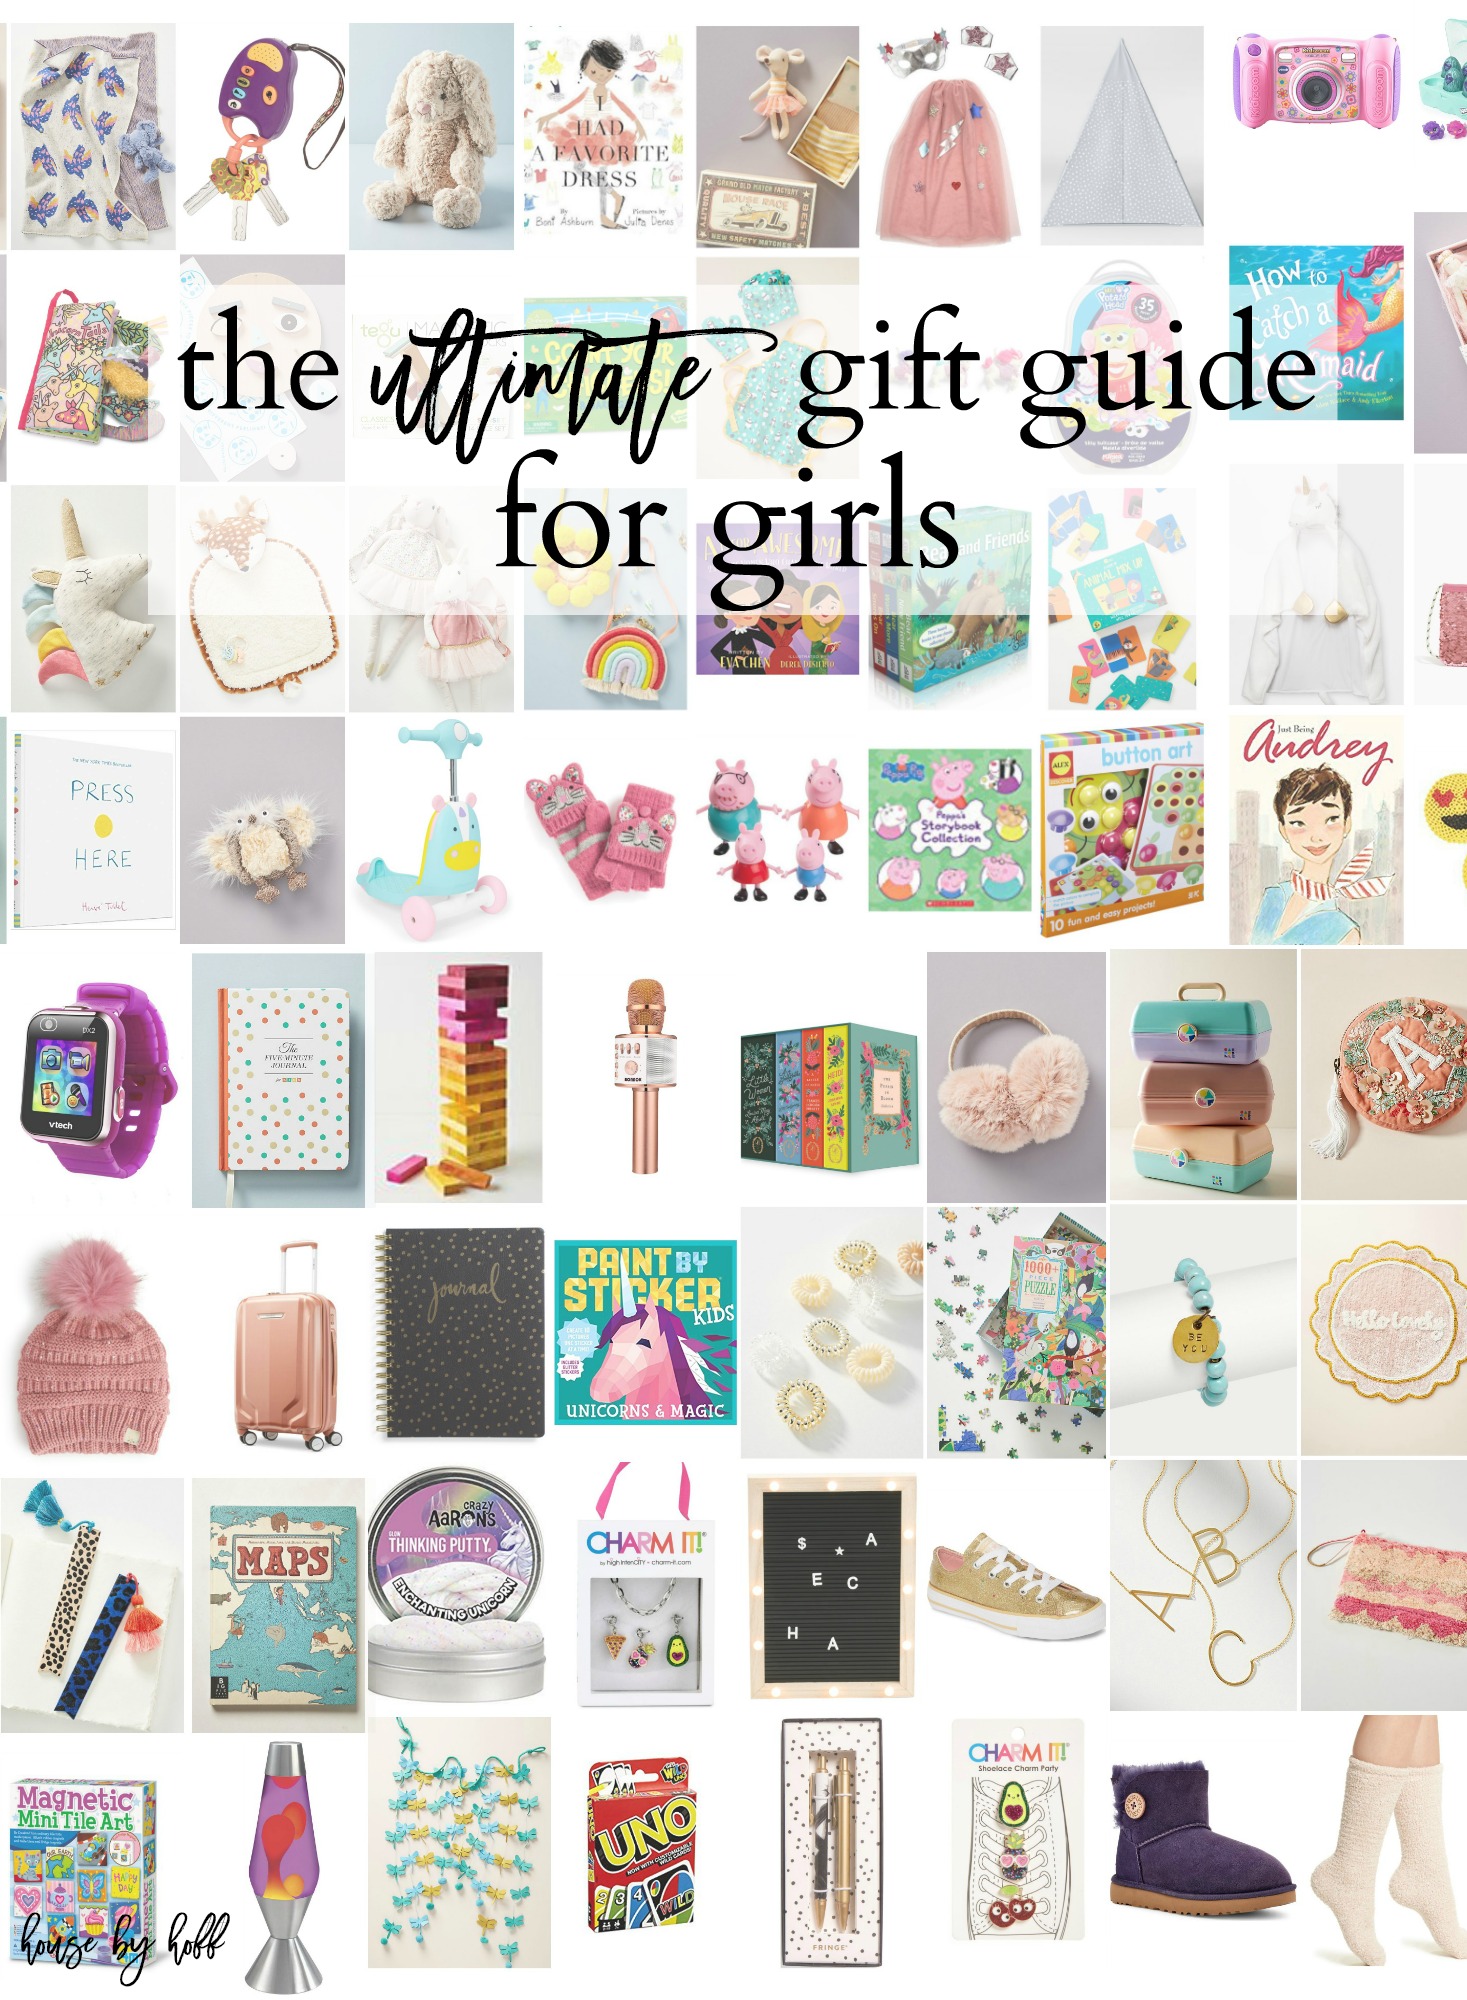 The Ultimate Gift Guide for Girls House by Hoff